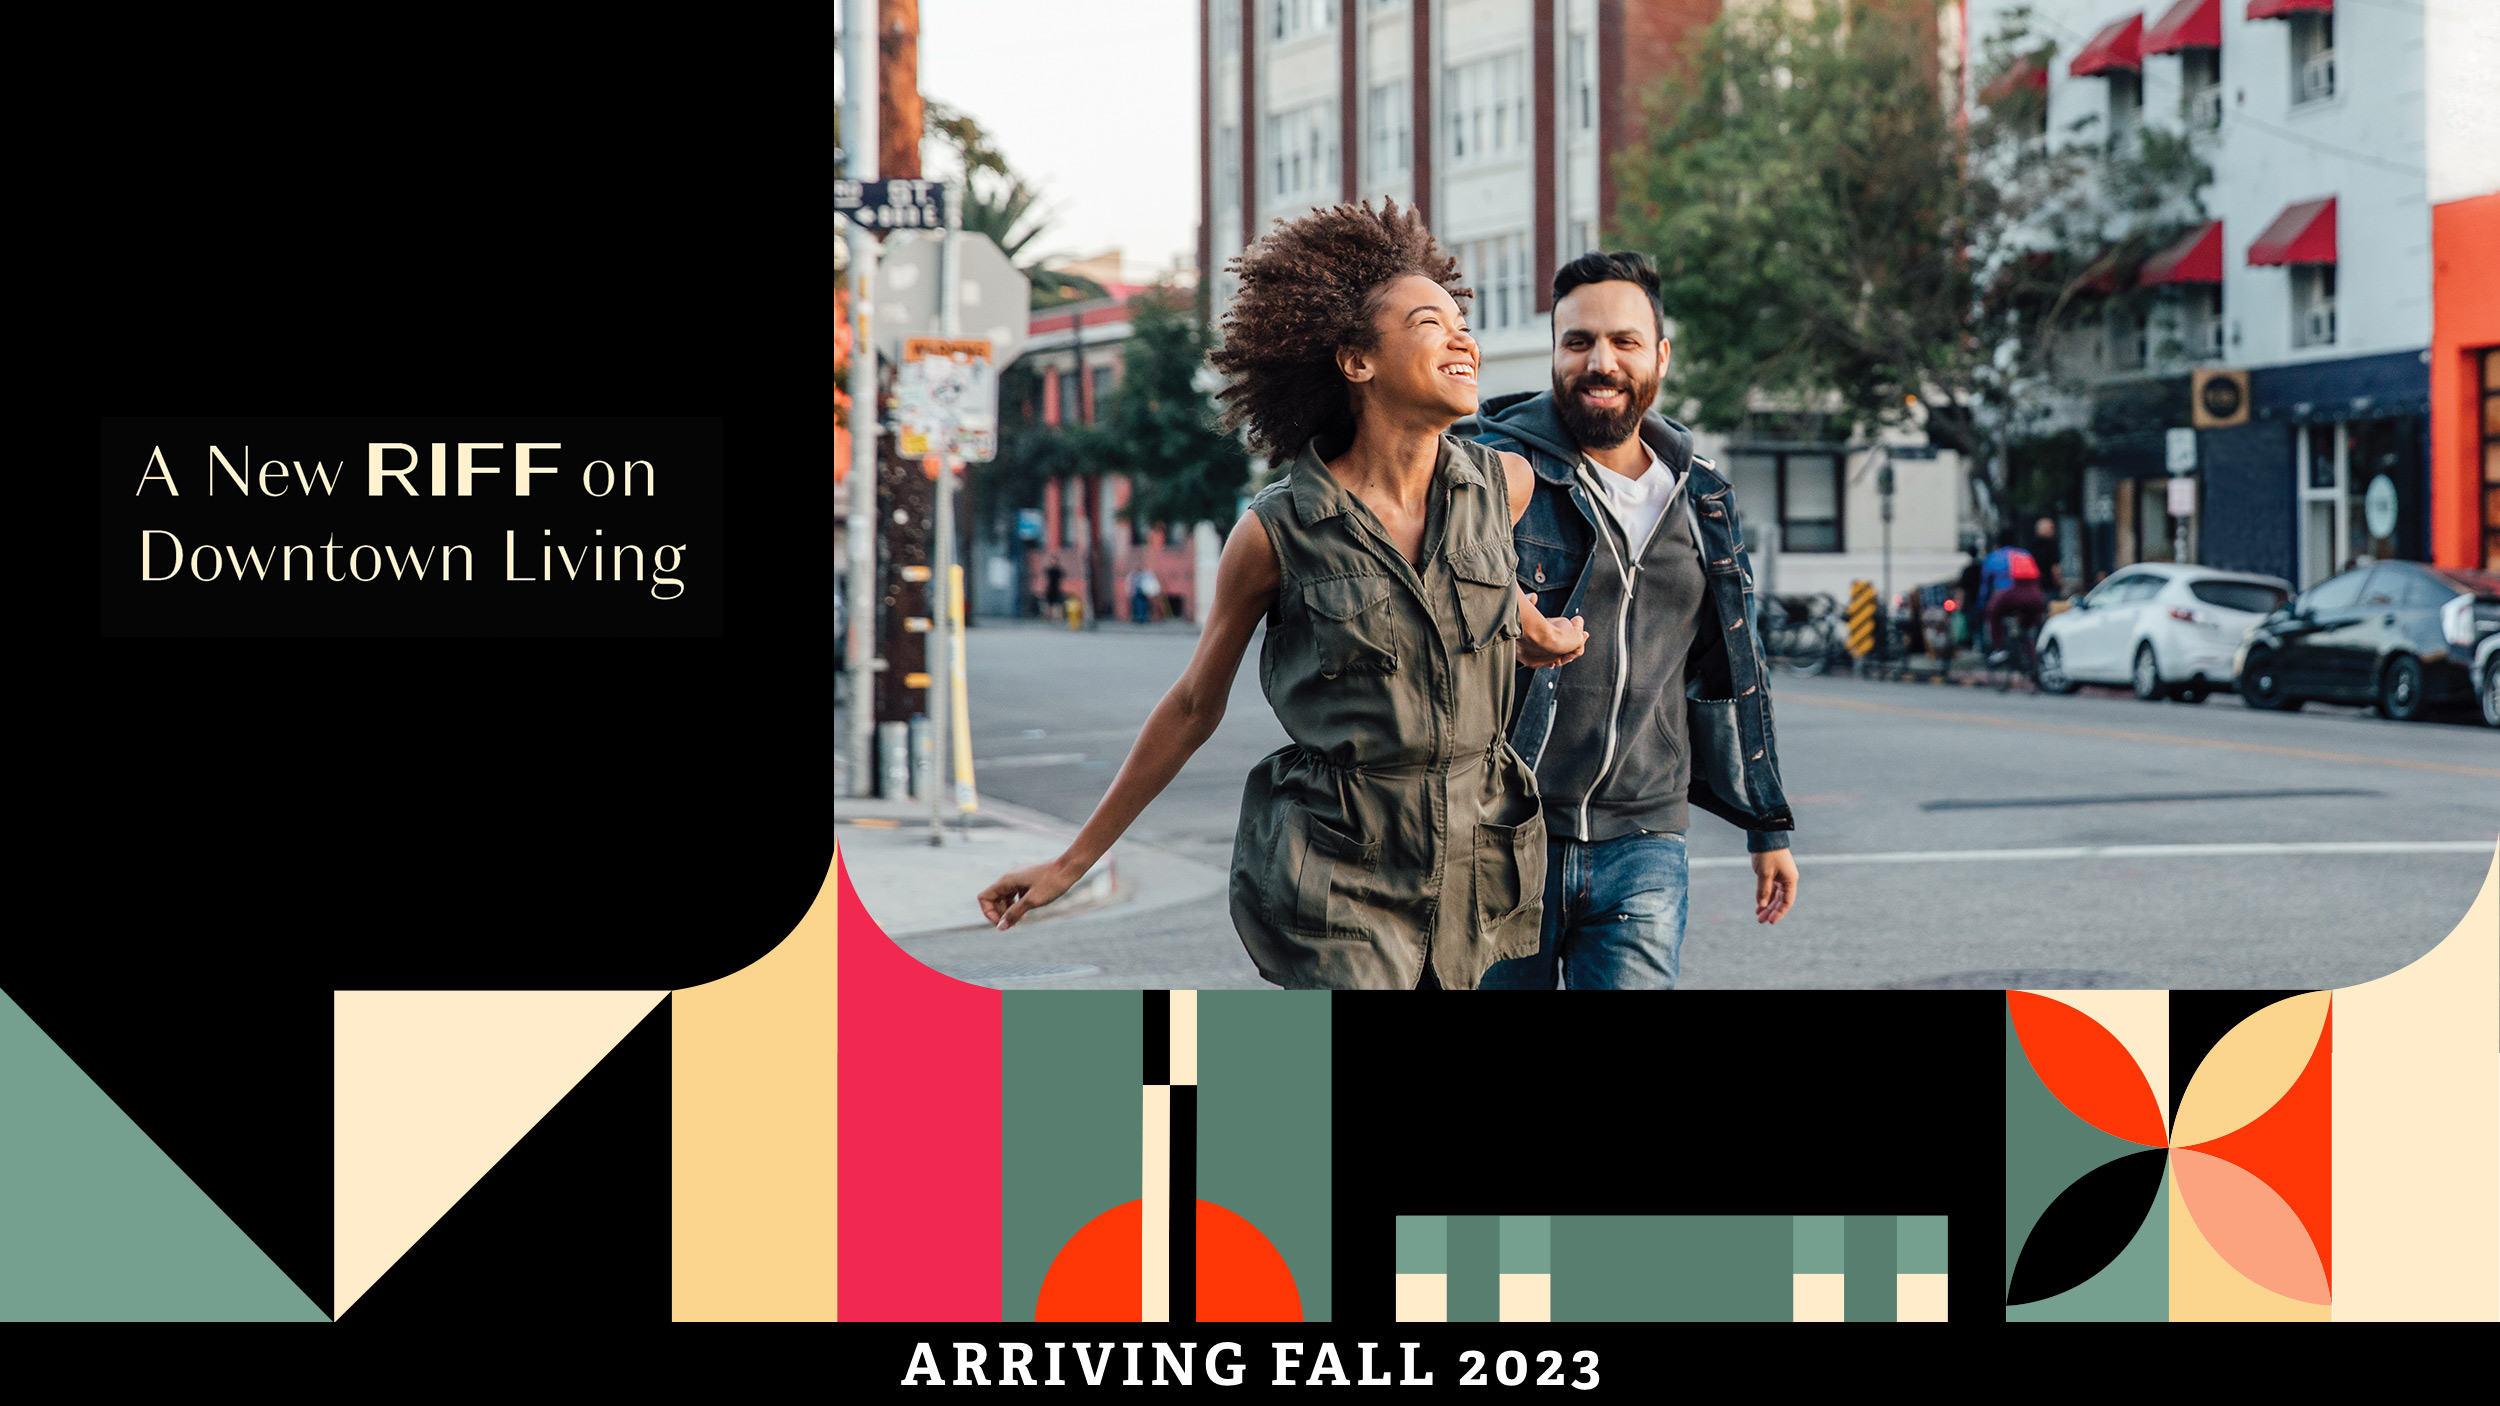 Couple walking down street. Copy: A new RIFF on Downtown Living. Arriving fall 2023